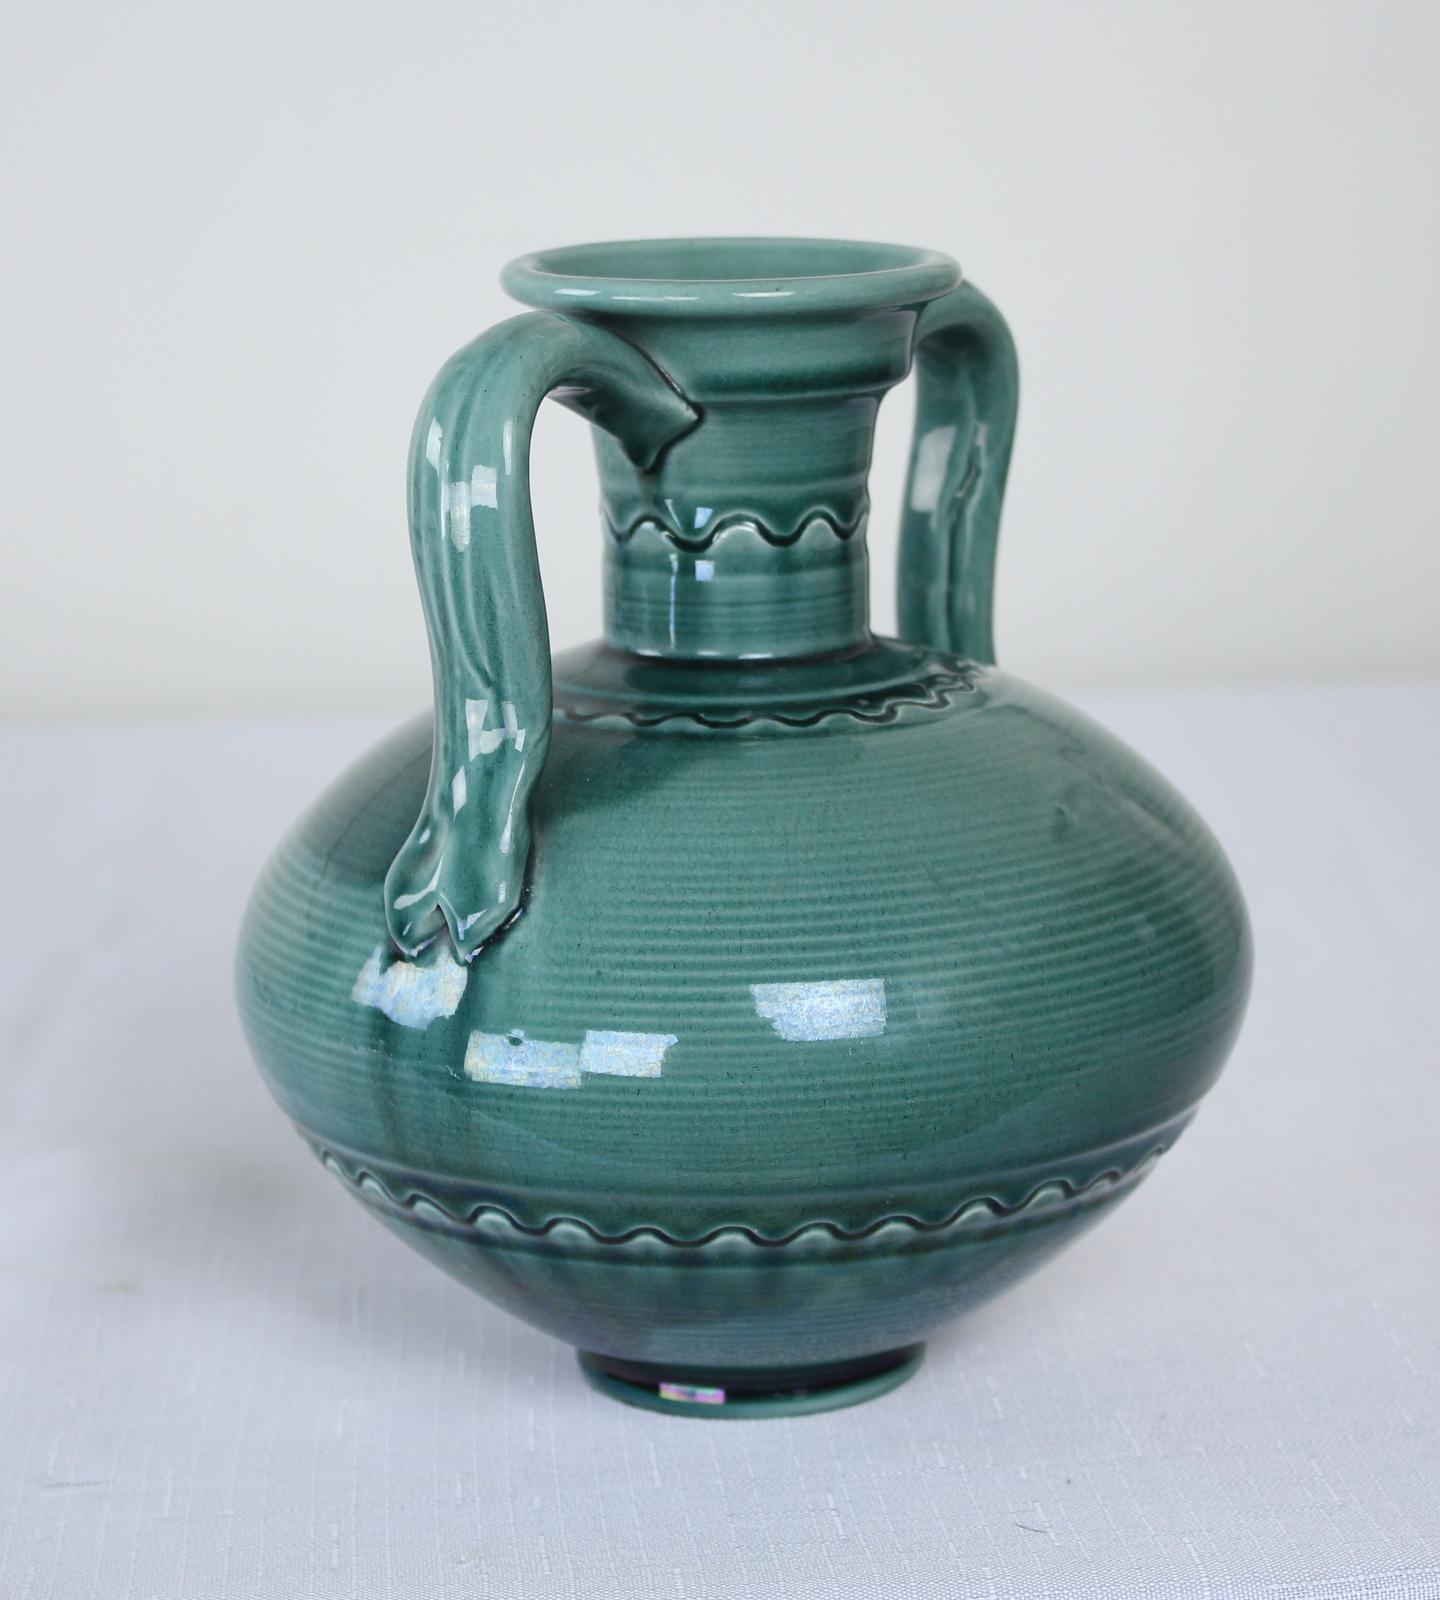 Art pottery vase by Burmantofts in the manner of Christopher Dresser. Anglo-Persian design, very popular in the period, with bulbous body and thin cylindrical neck, with a shaped handle to either side. In a striking shade of green. In good condition